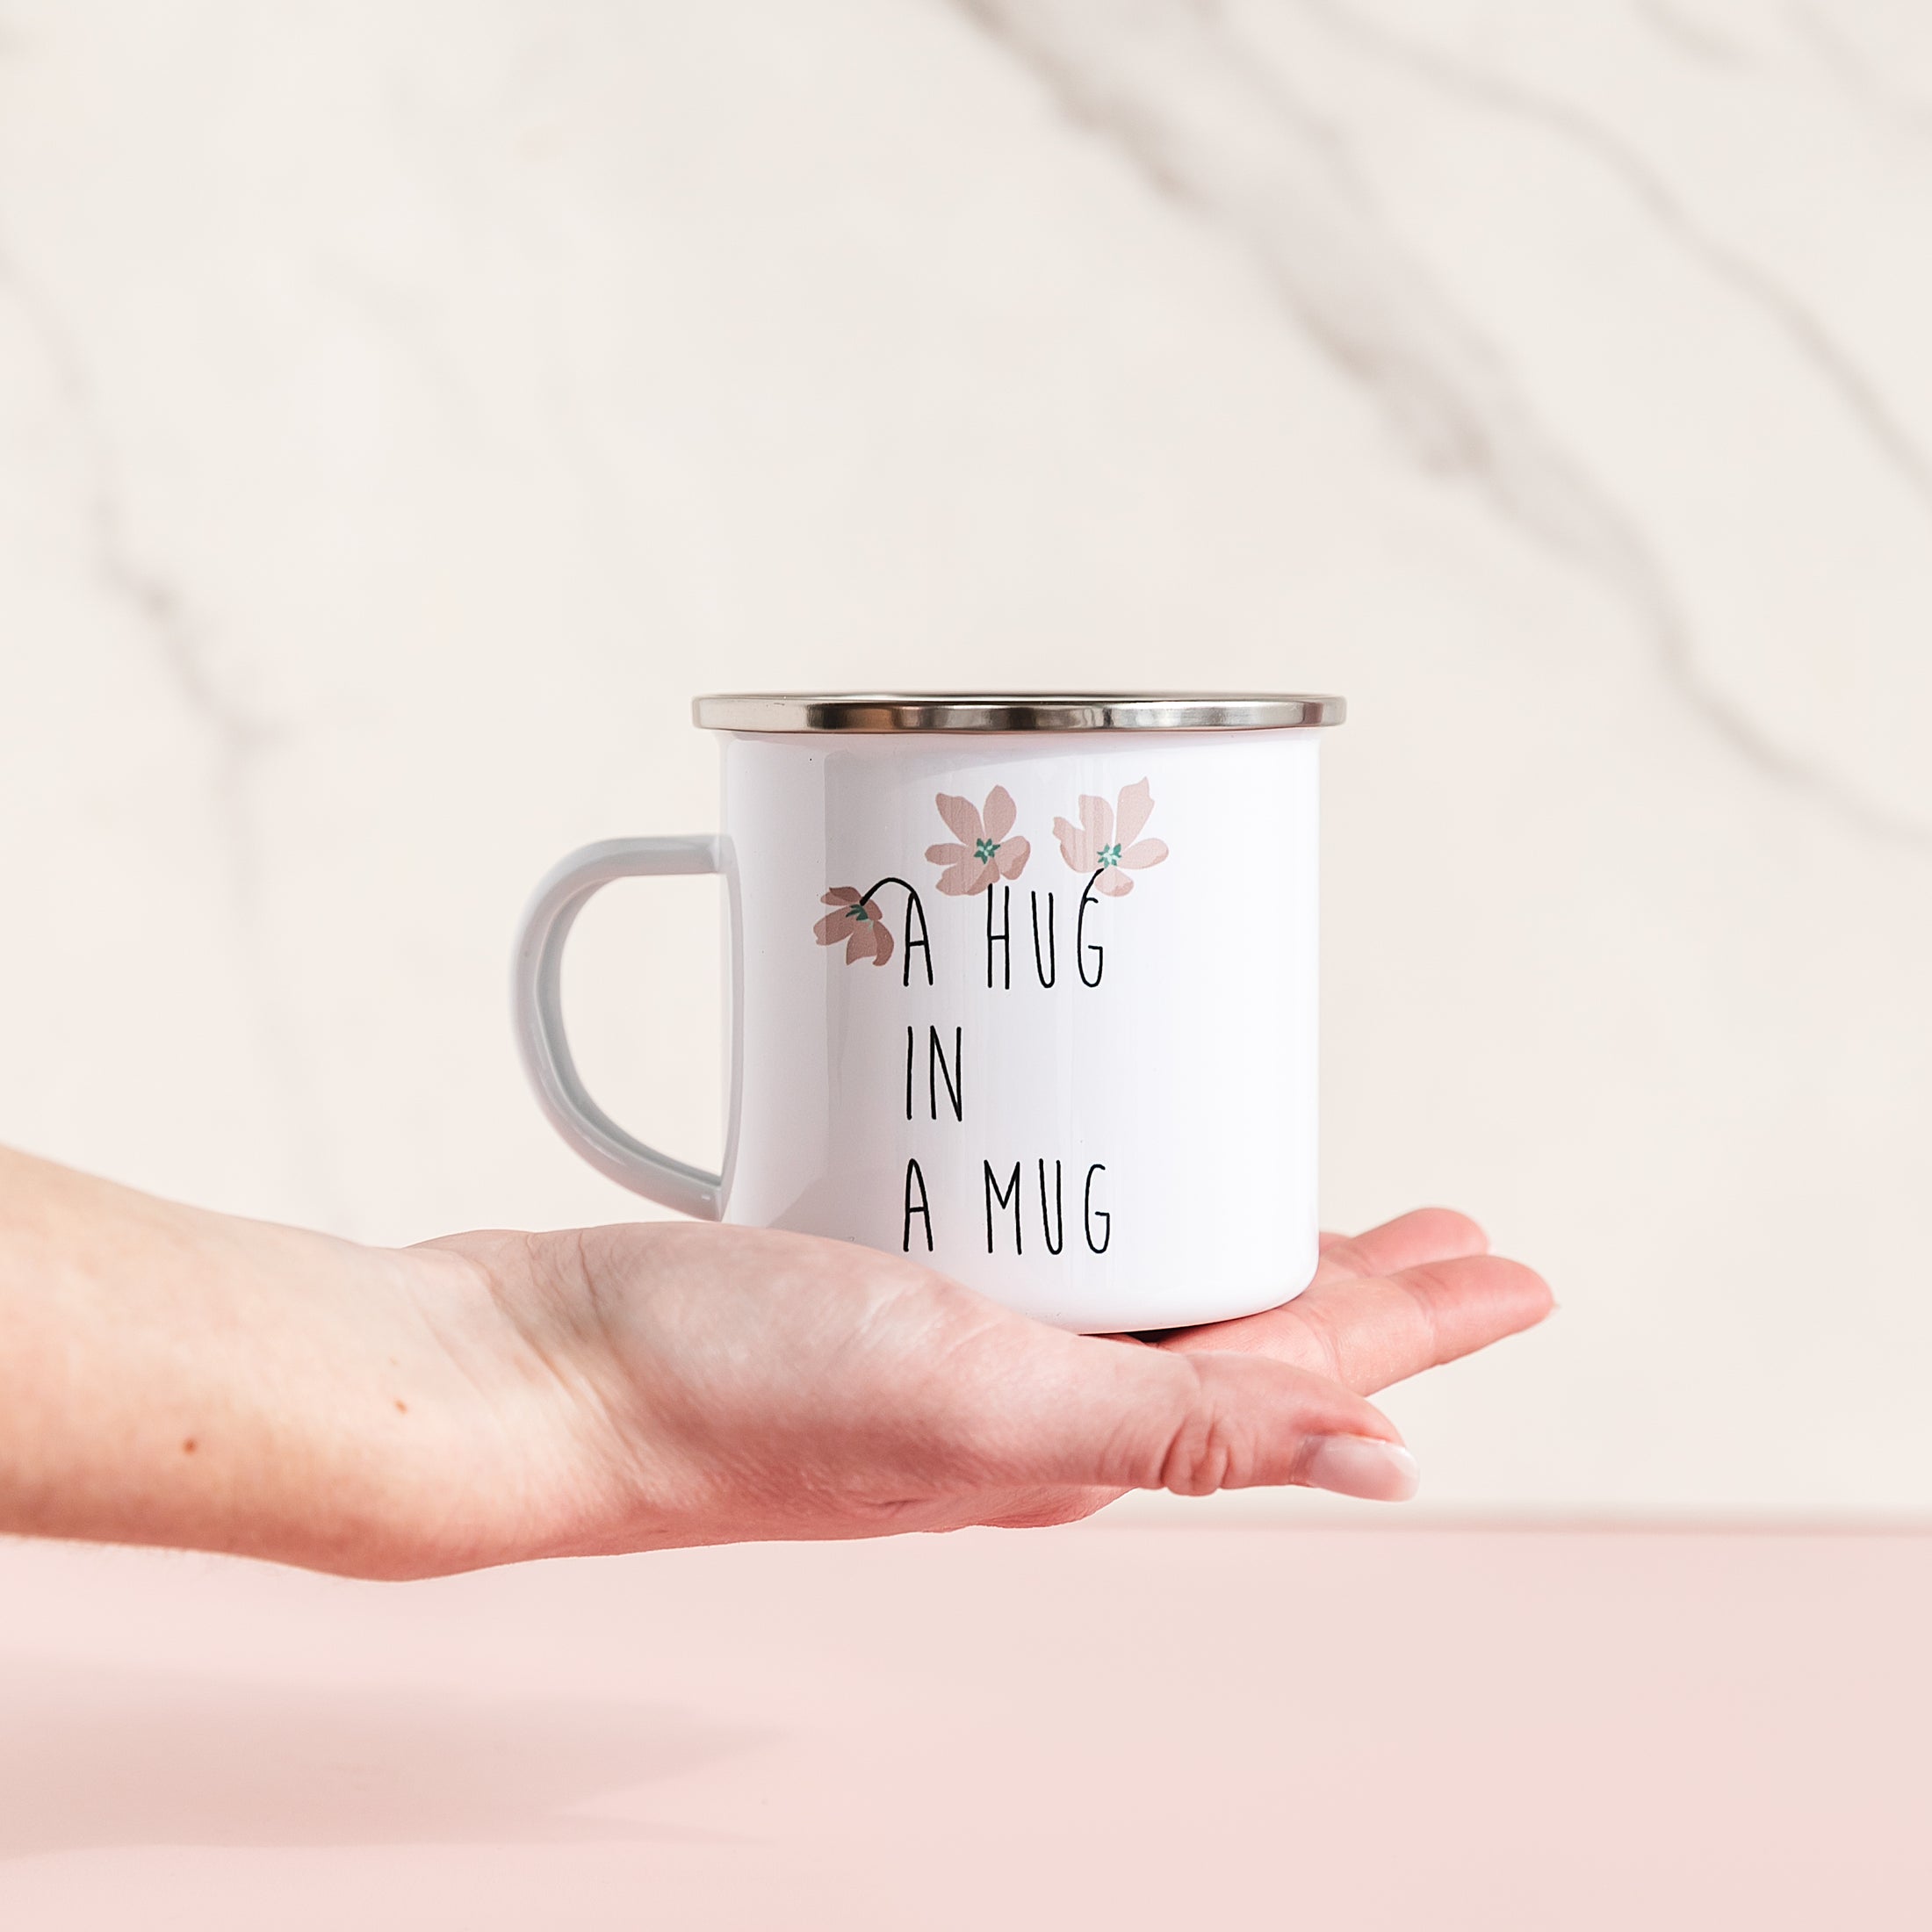 a hand holding a coffee mug with a quote on it